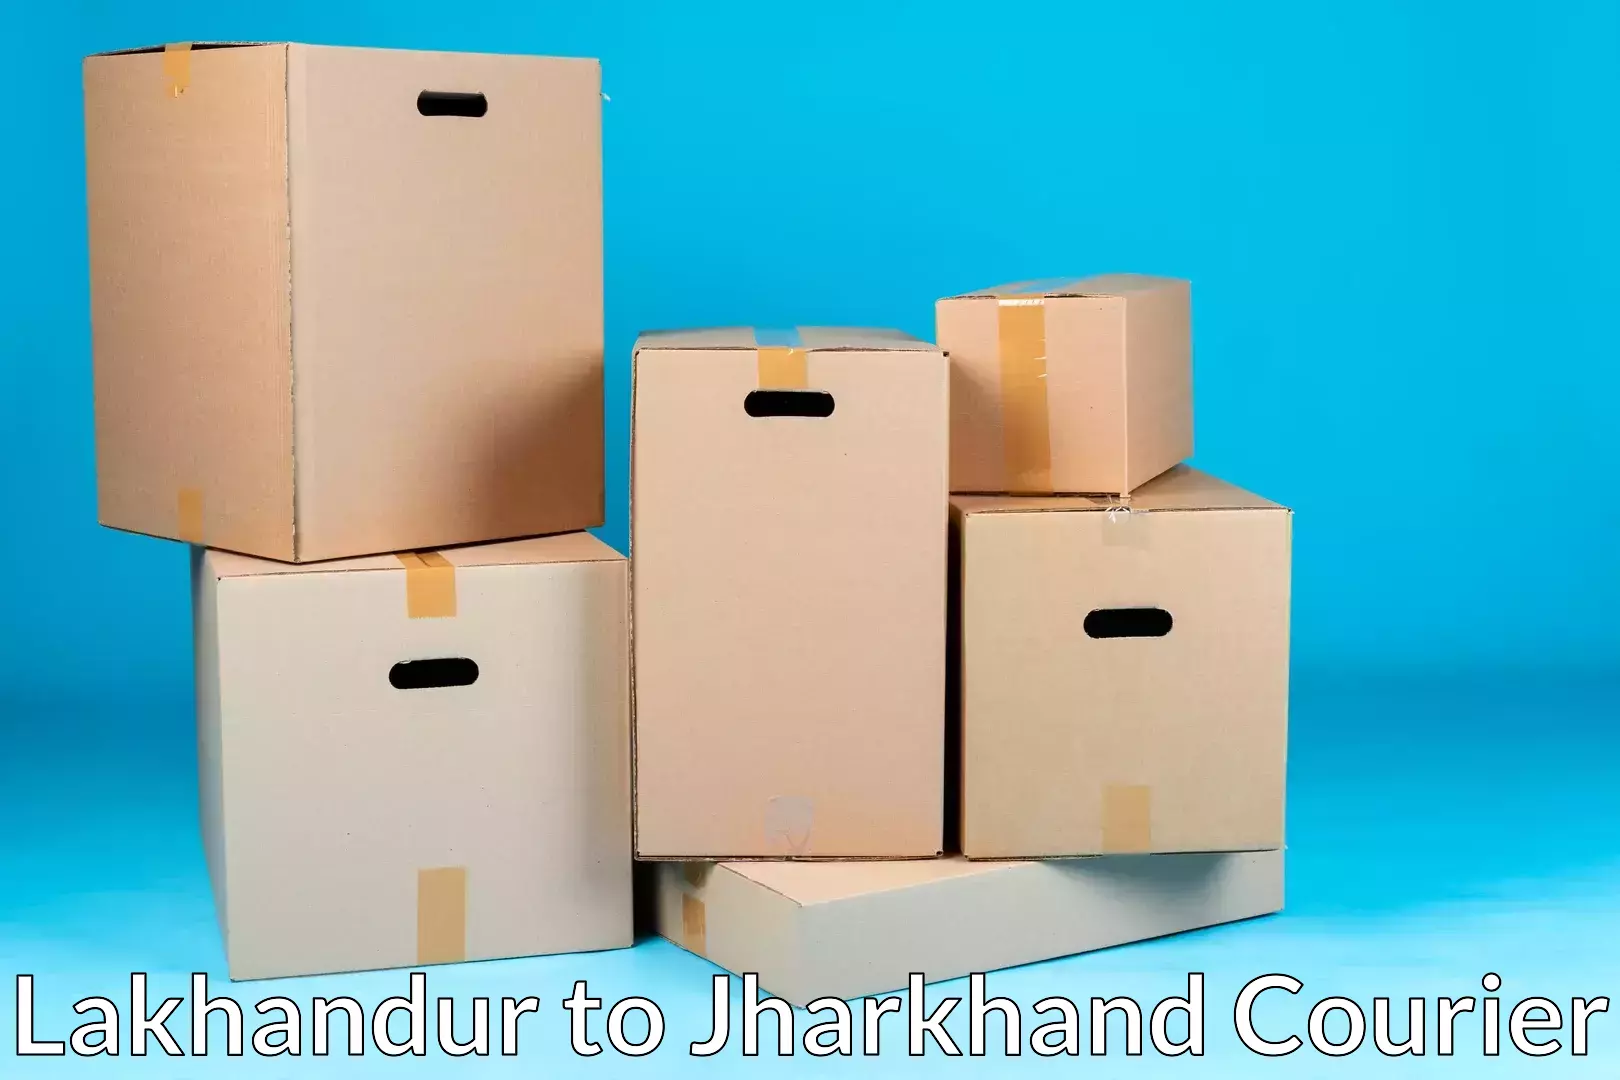 Full-service household moving in Lakhandur to Jharkhand